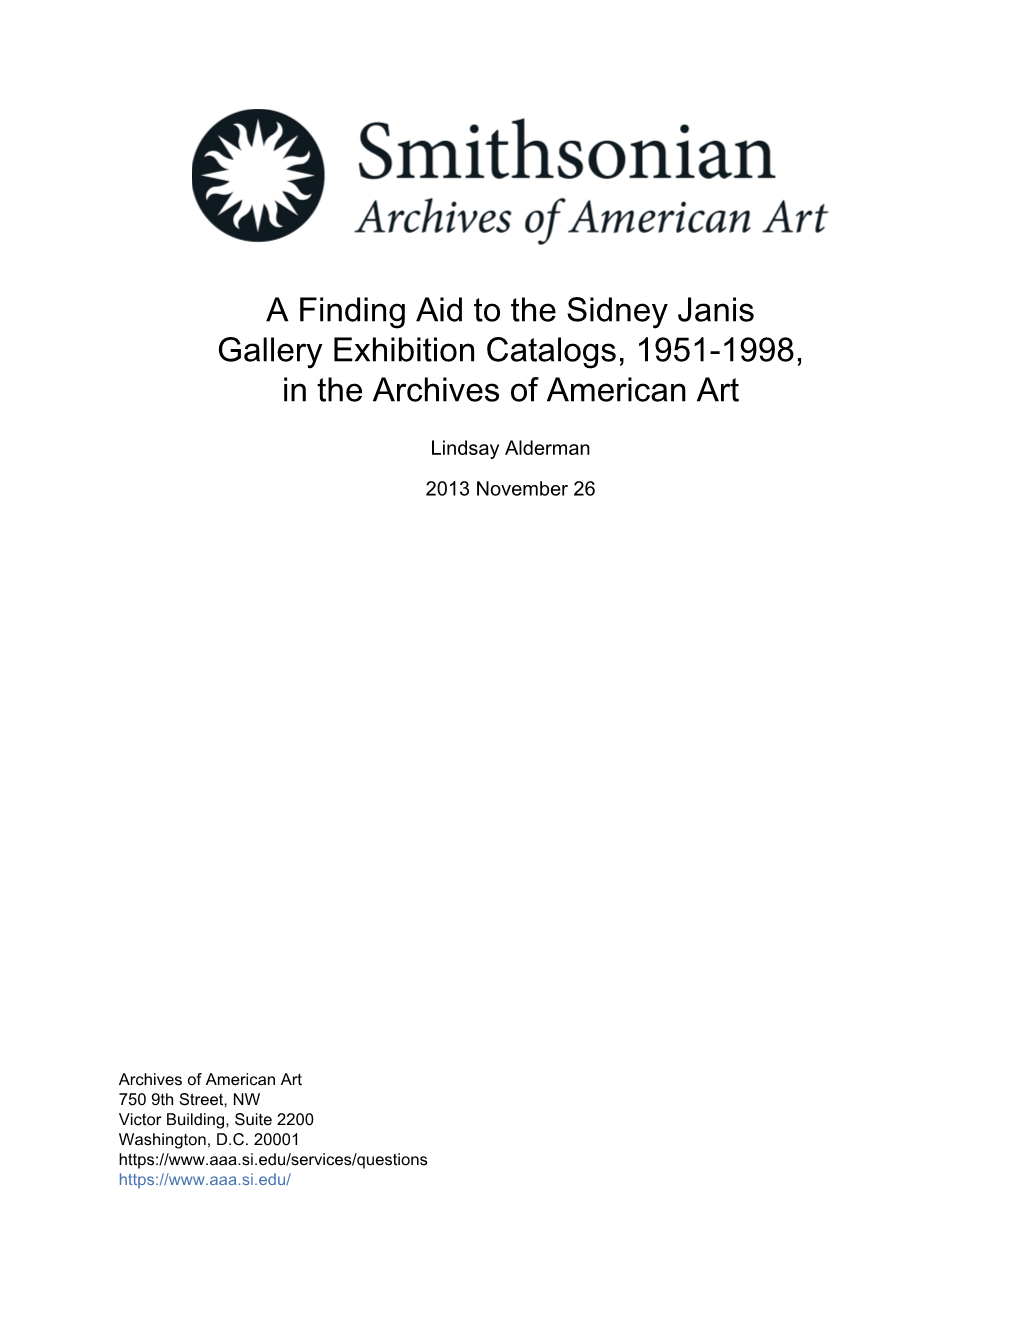 A Finding Aid to the Sidney Janis Gallery Exhibition Catalogs, 1951-1998, in the Archives of American Art